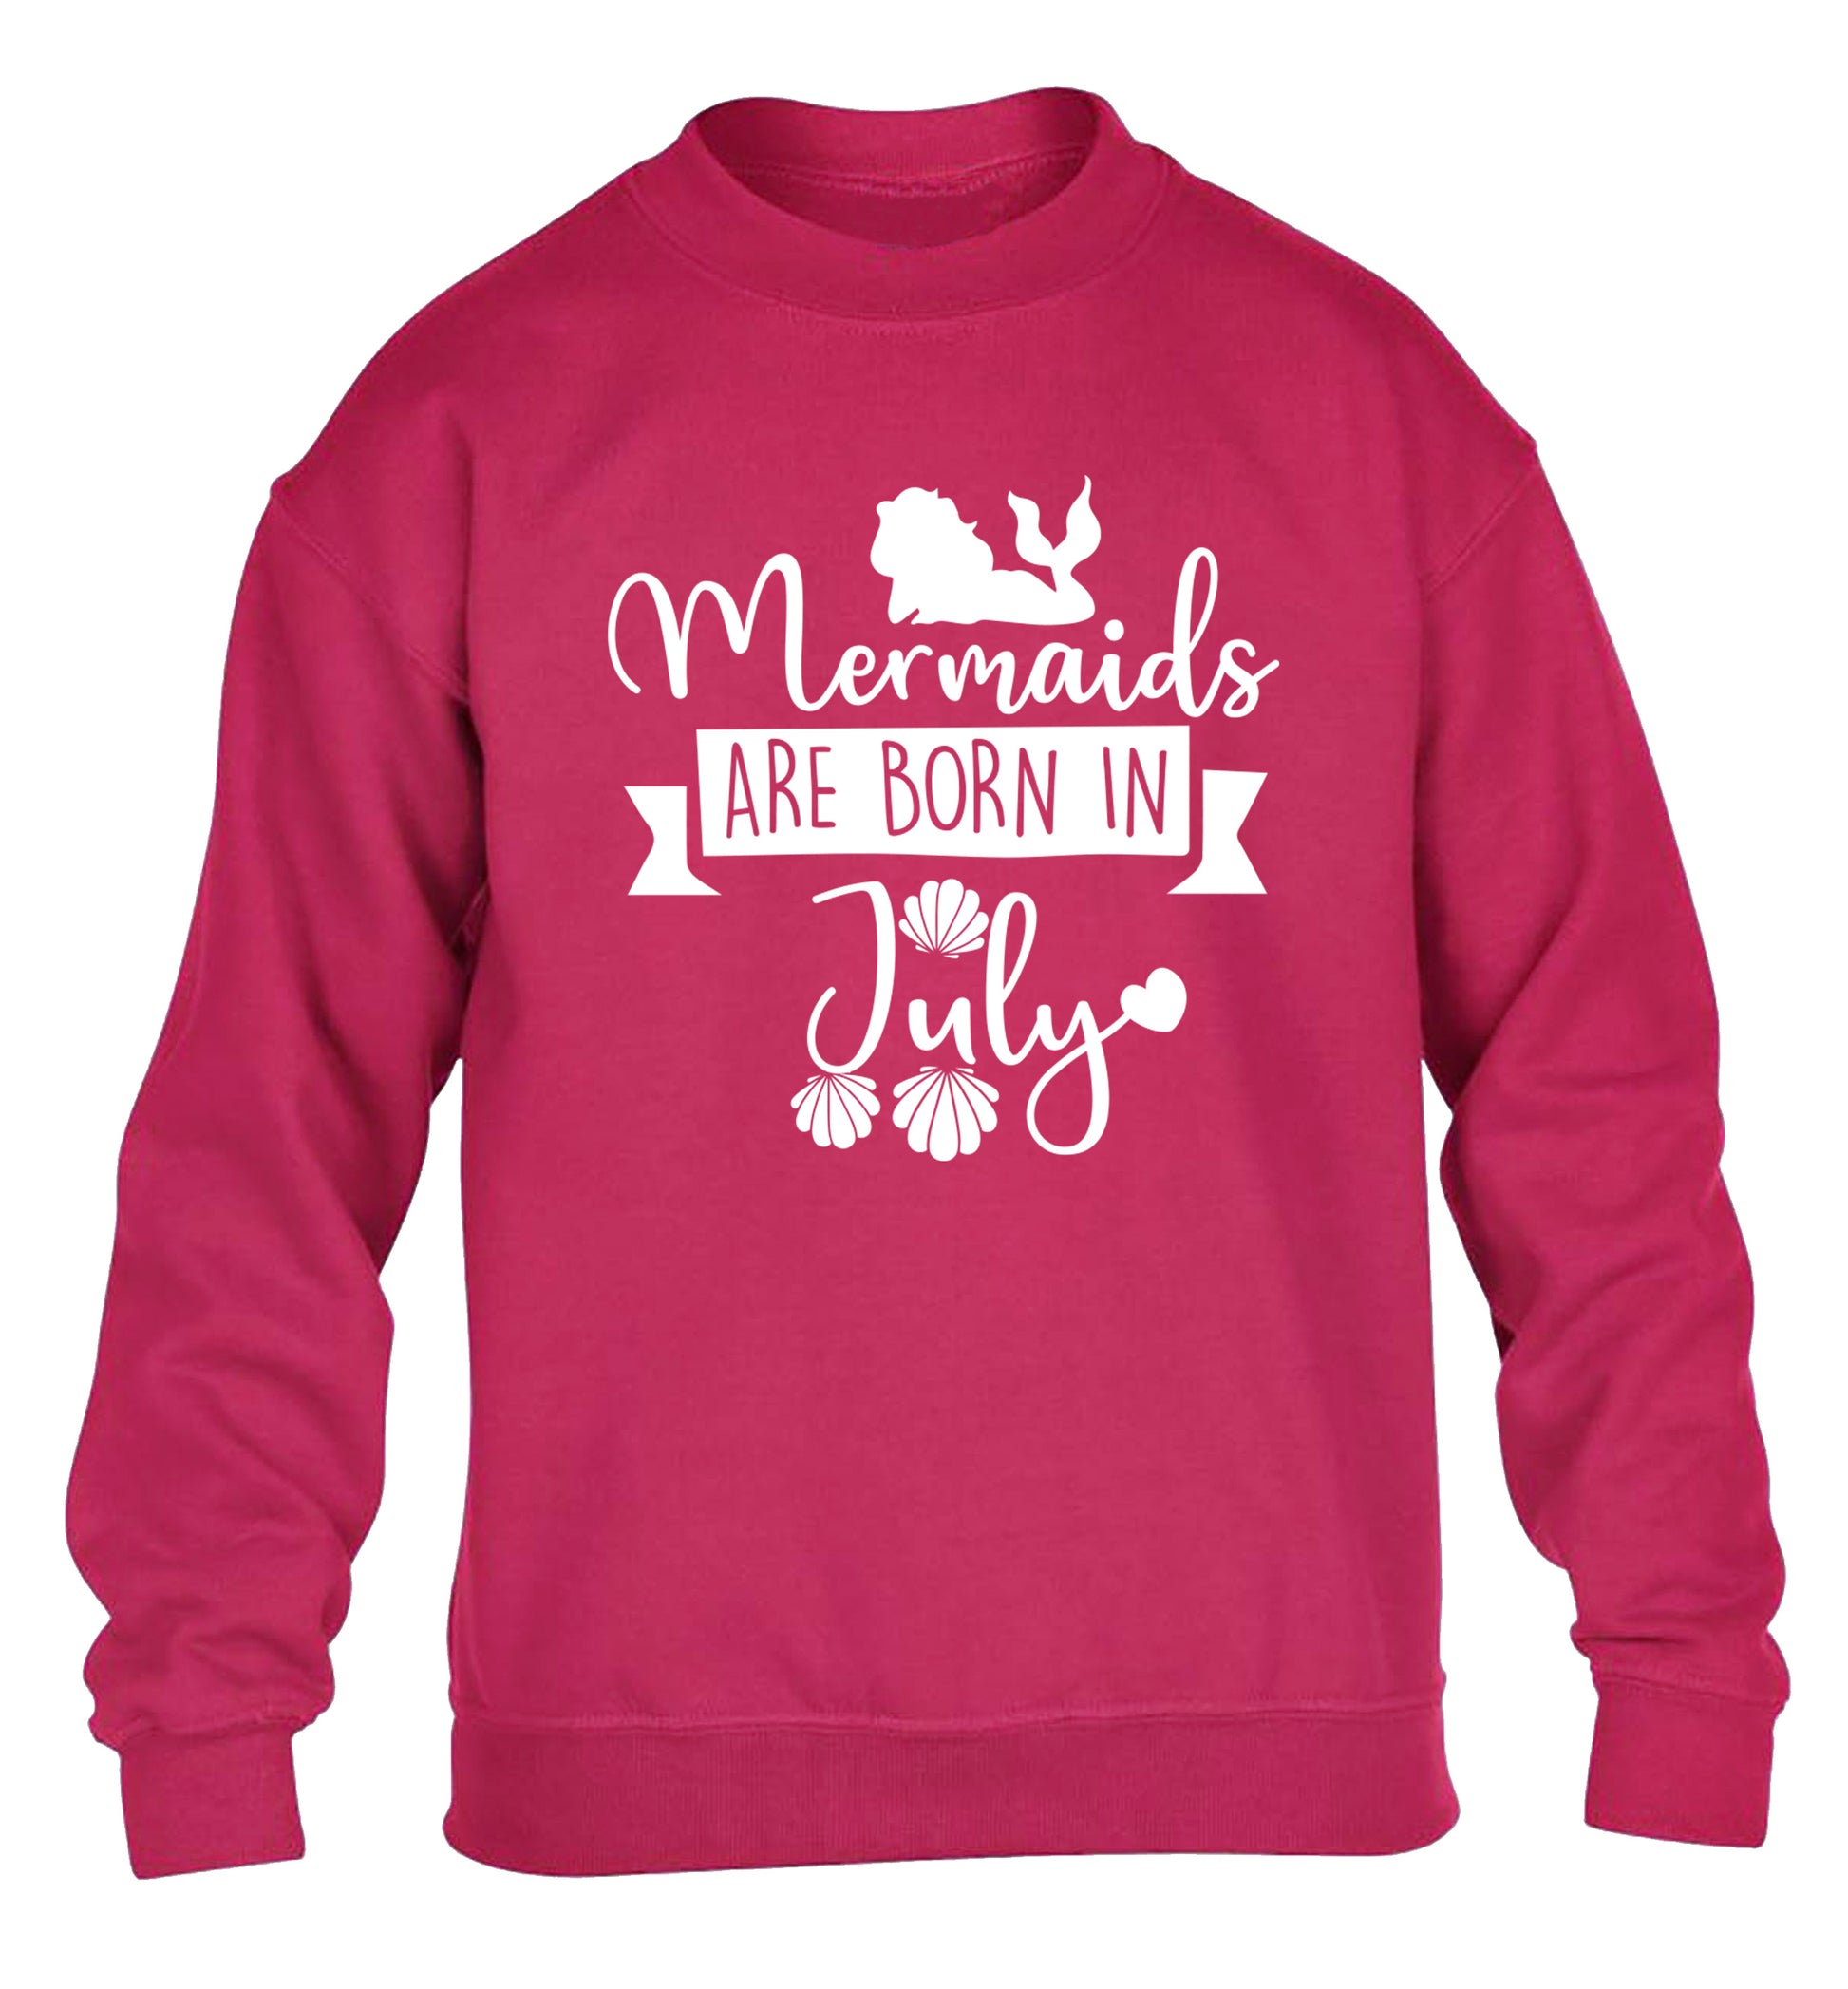 Mermaids are born in July children's pink sweater 12-13 Years